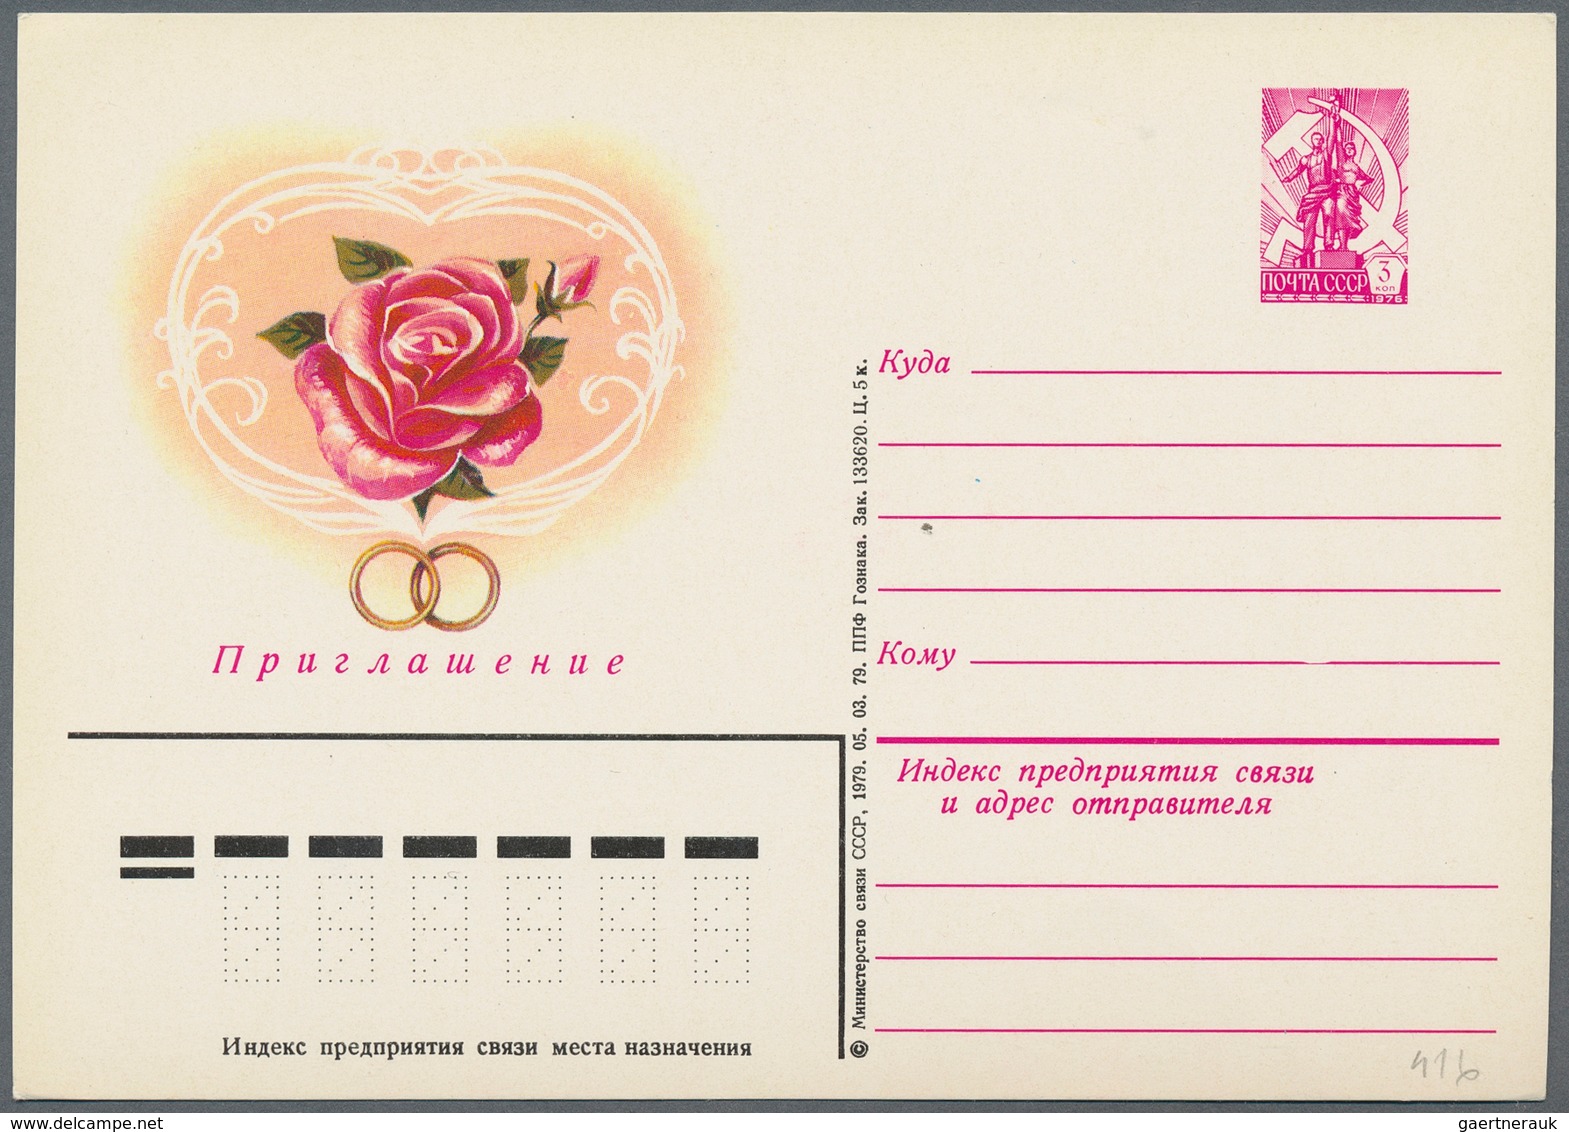 Sowjetunion - Ganzsachen: 1978/80 seven unused pictured postal stationery cards with text on the bac